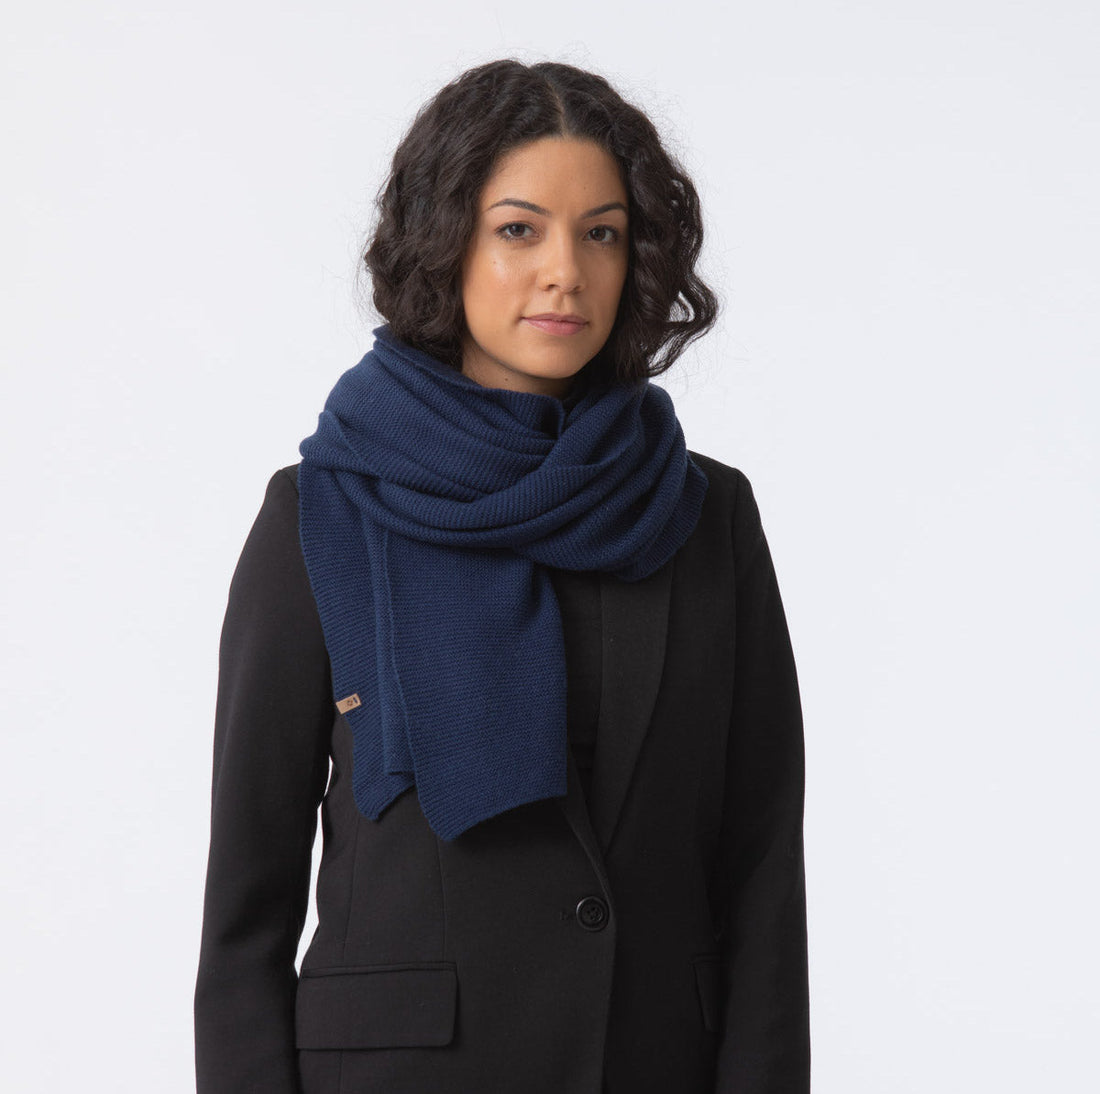 Scarves fair trade ethical sustainable fashion Garter Stitched Merino Scarf in Blue conscious purchase Dinadi